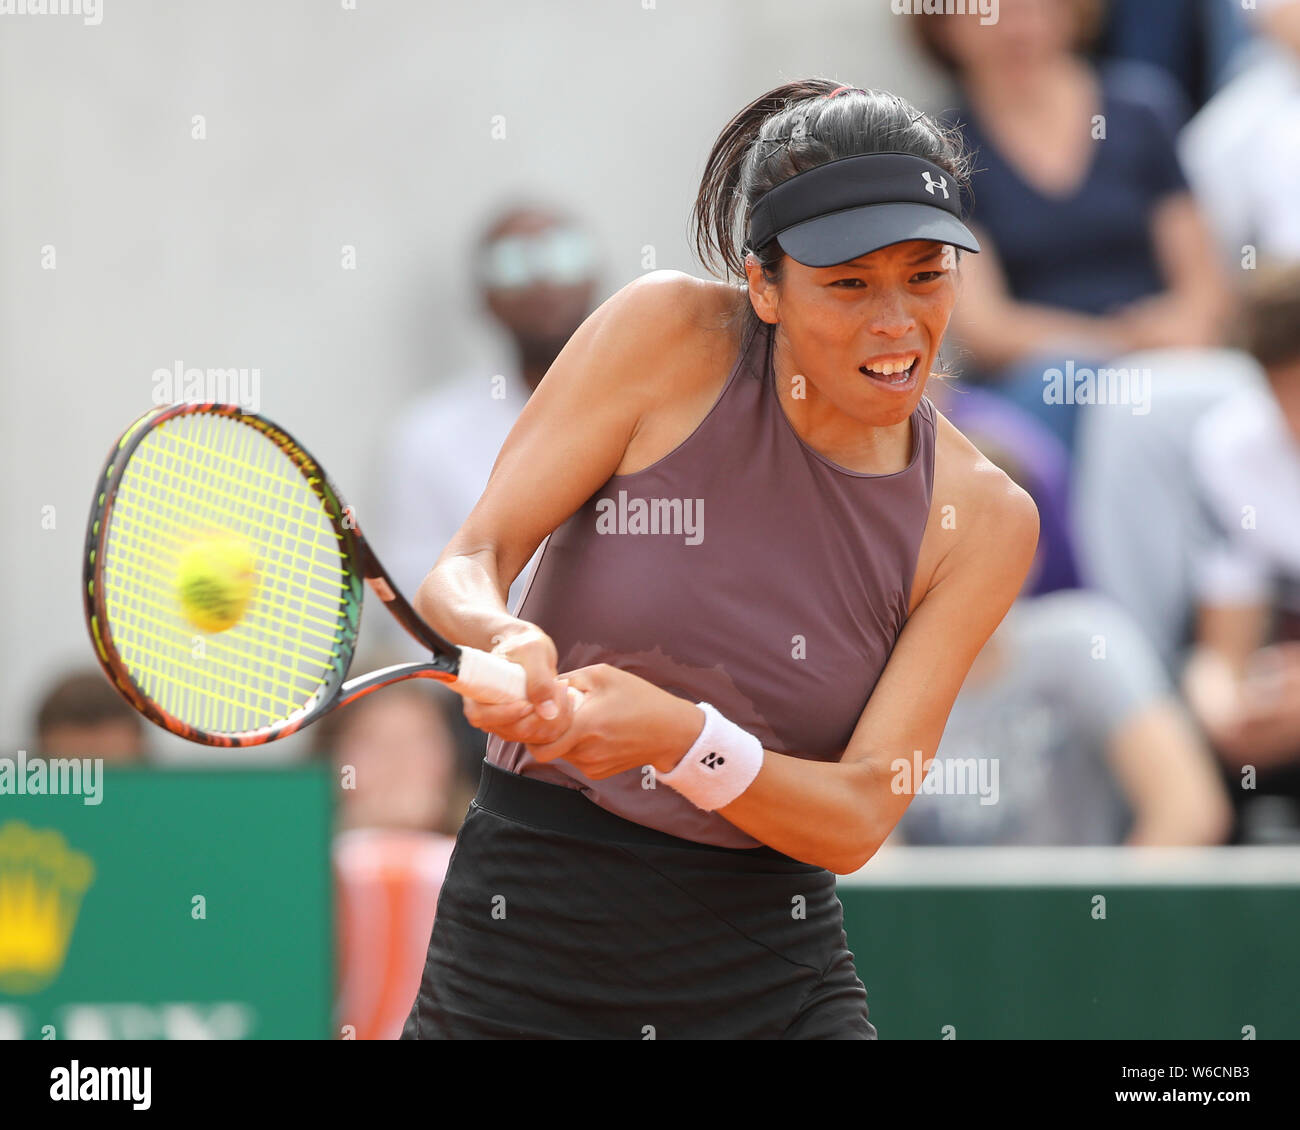 Taiwanese  tennis player Su-Wei Hsieh playing  a backhand shot in French Open 2019  tournament, Paris, France Stock Photo